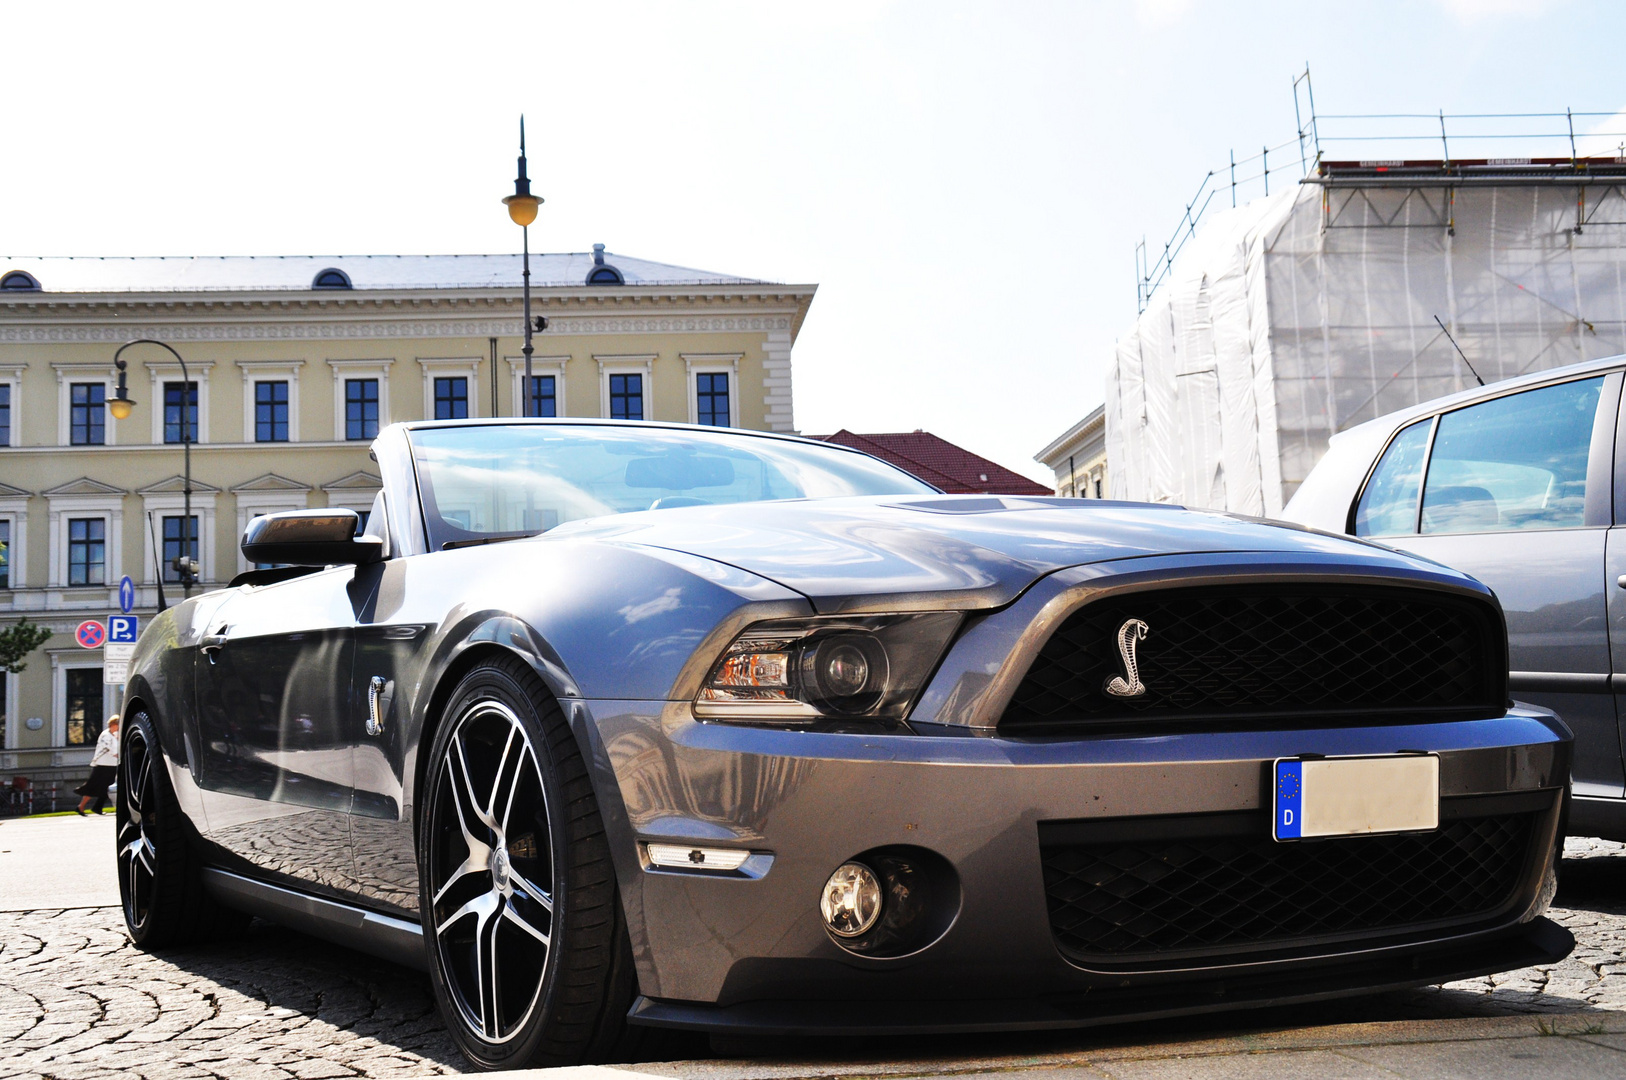 2010 Ford Mustang Shelby Cabrio